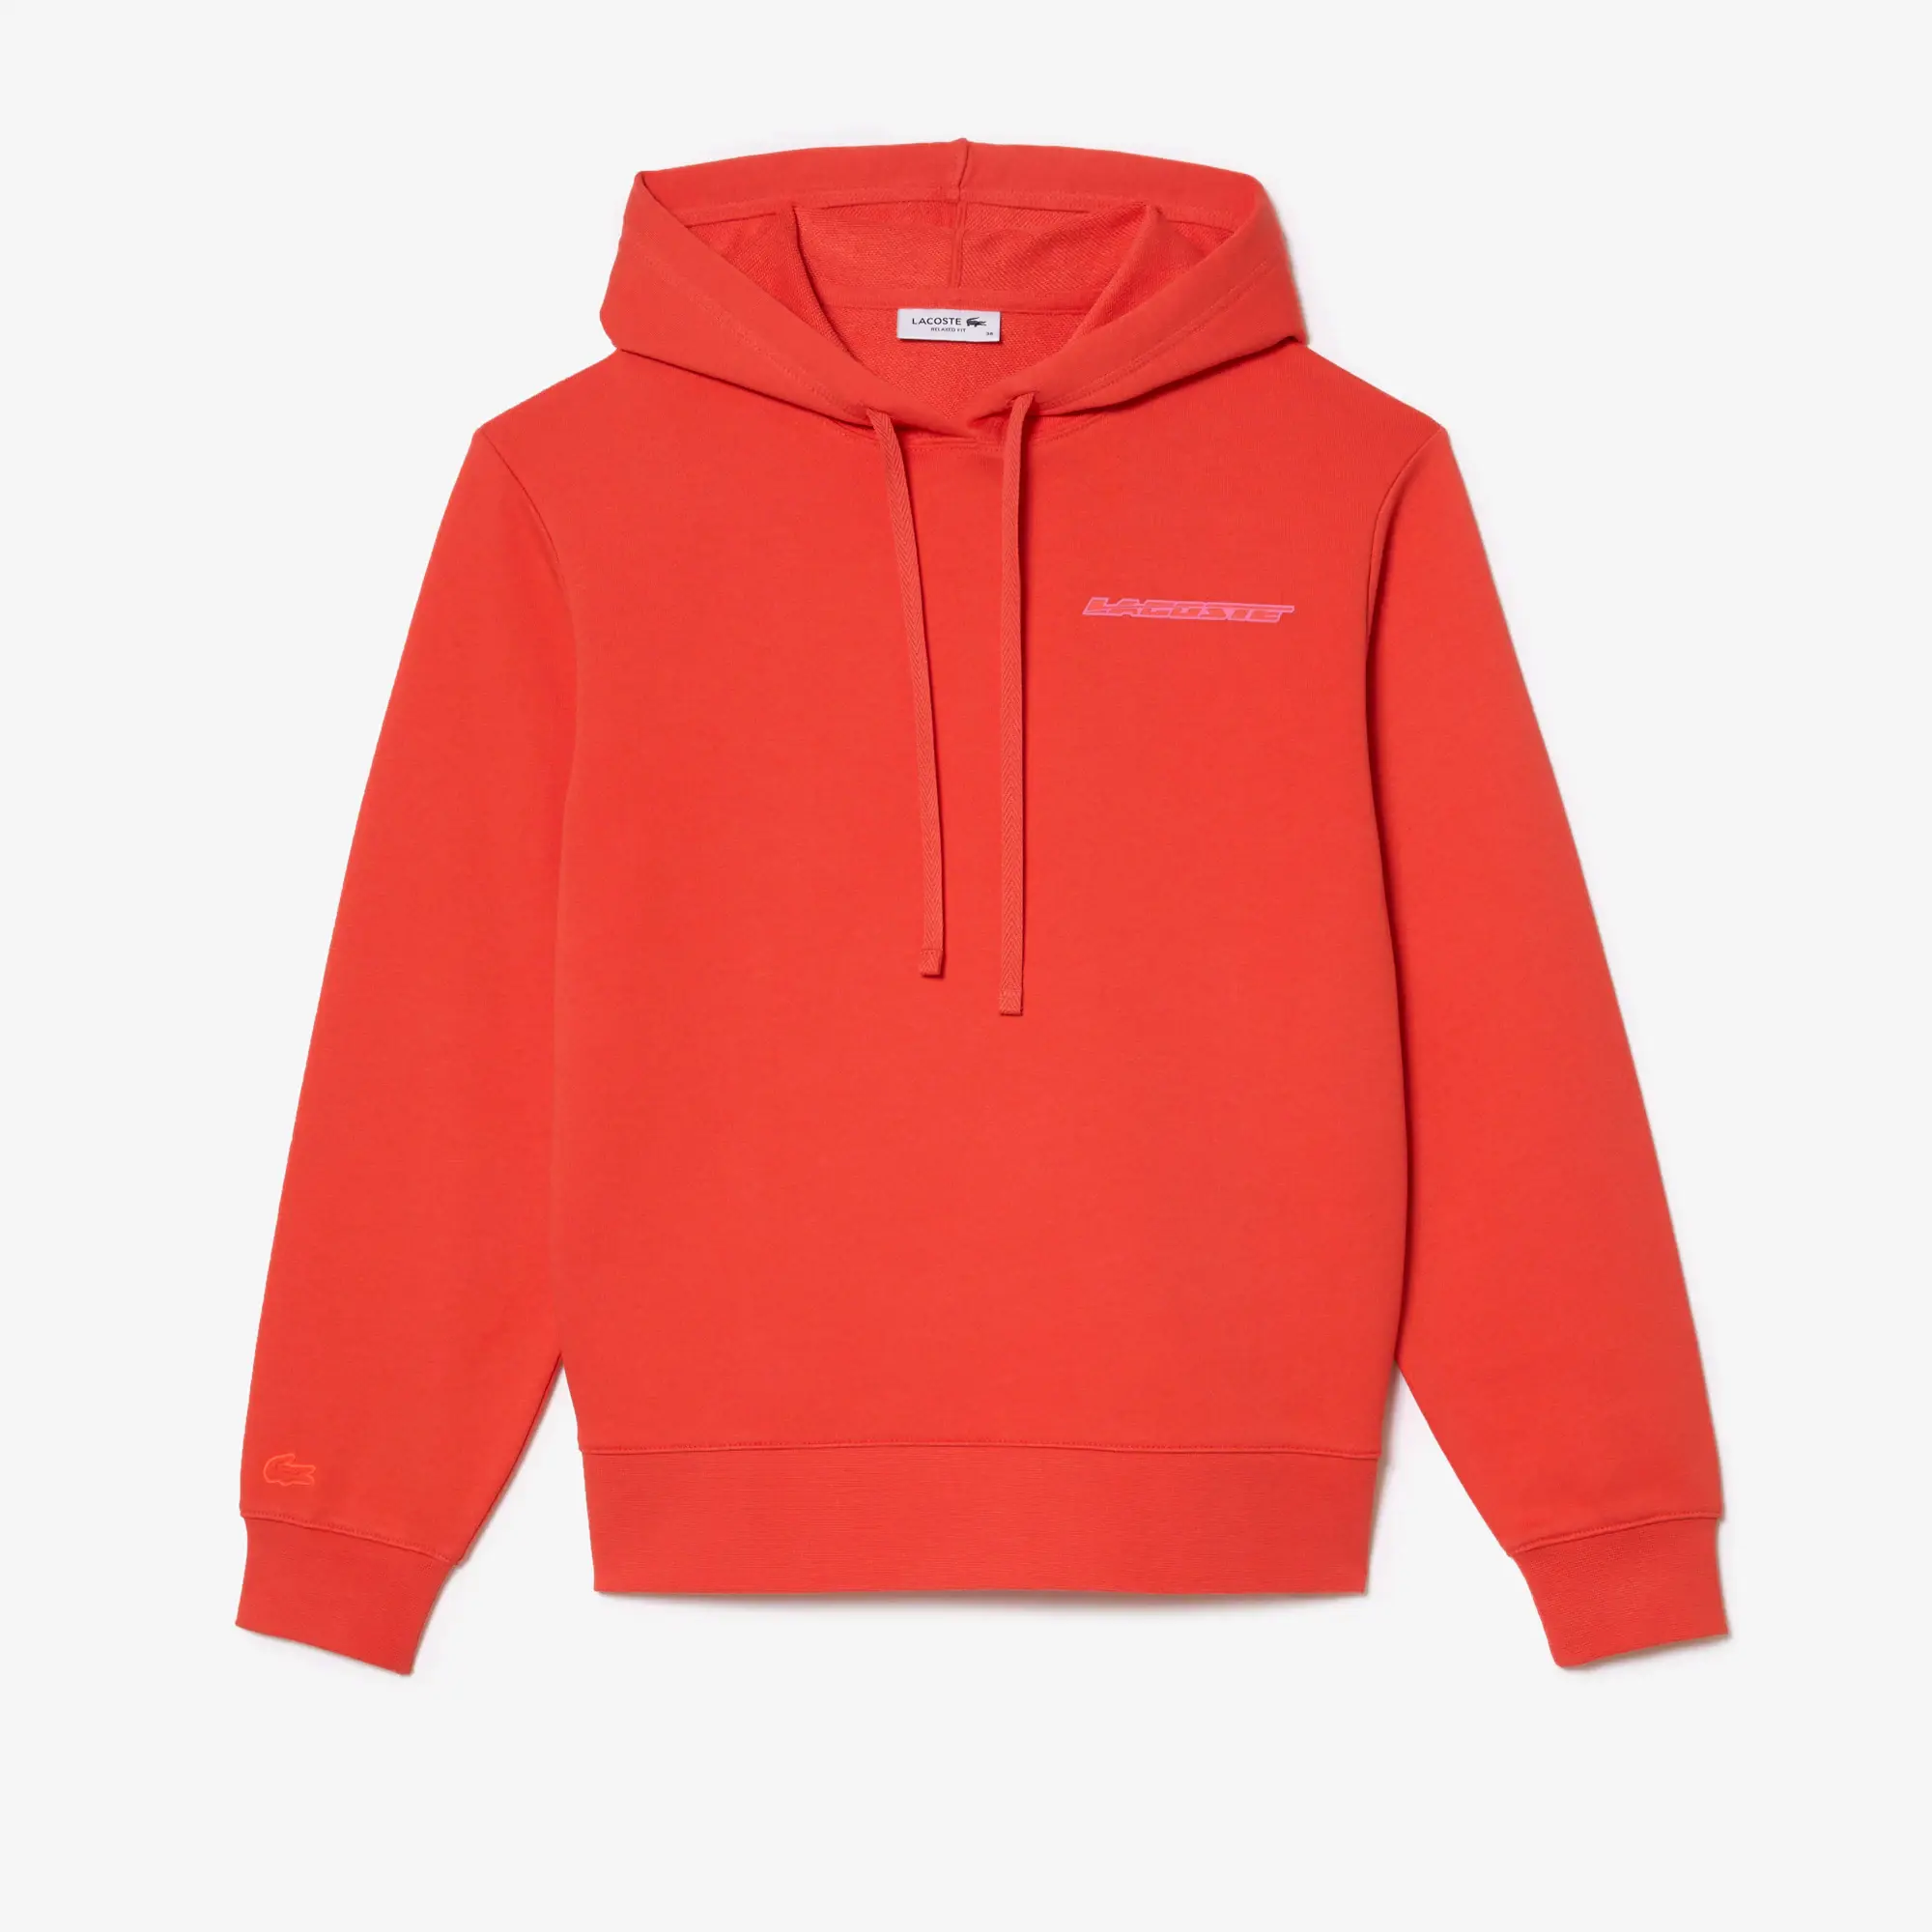 Lacoste Women’s Loose Fit Hoodie with Contrast Branding. 2